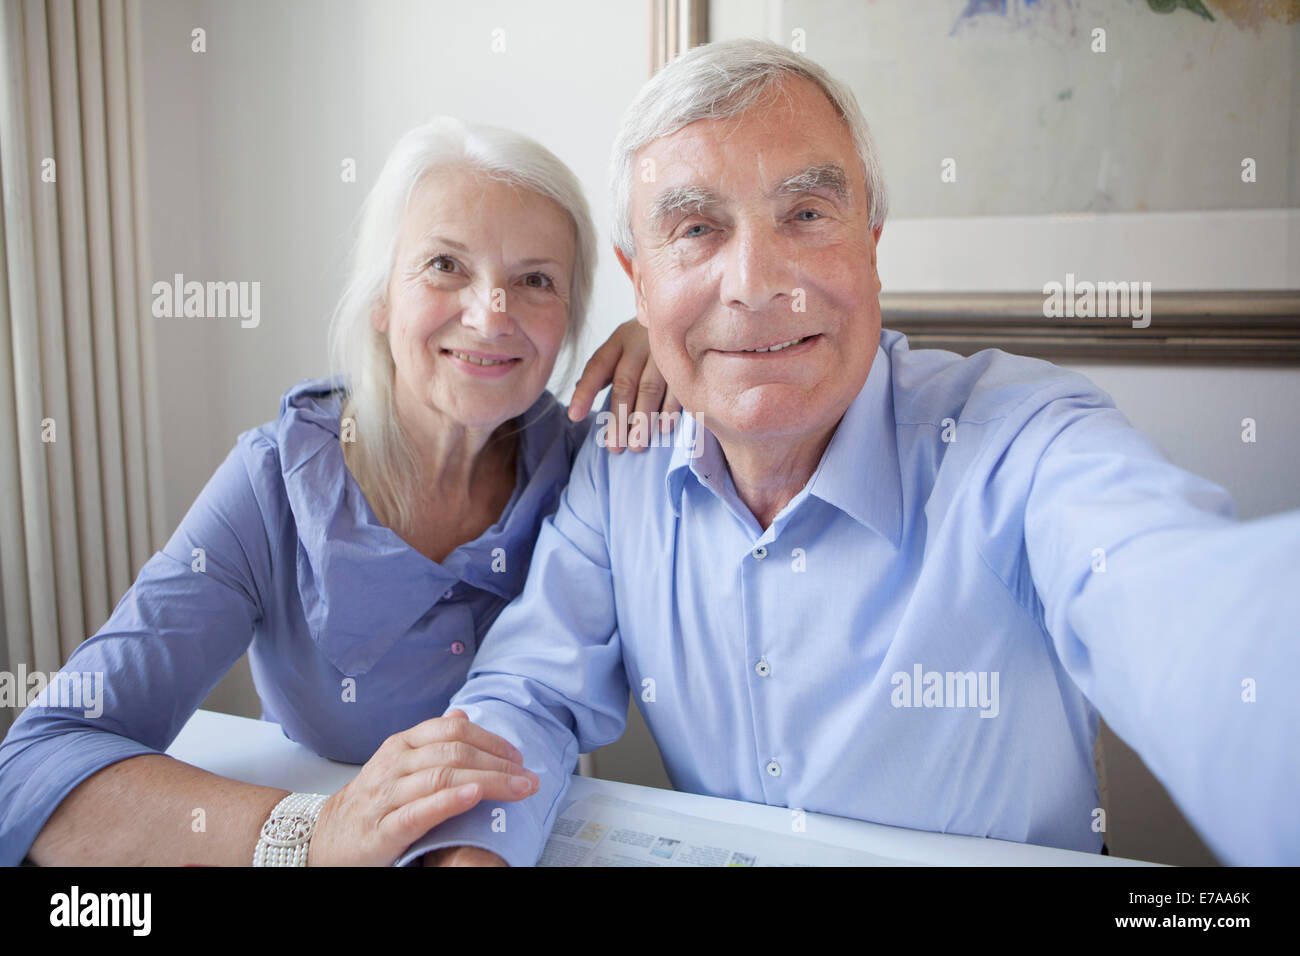 Portrait of smiling senior couple sitting at table in house Banque D'Images